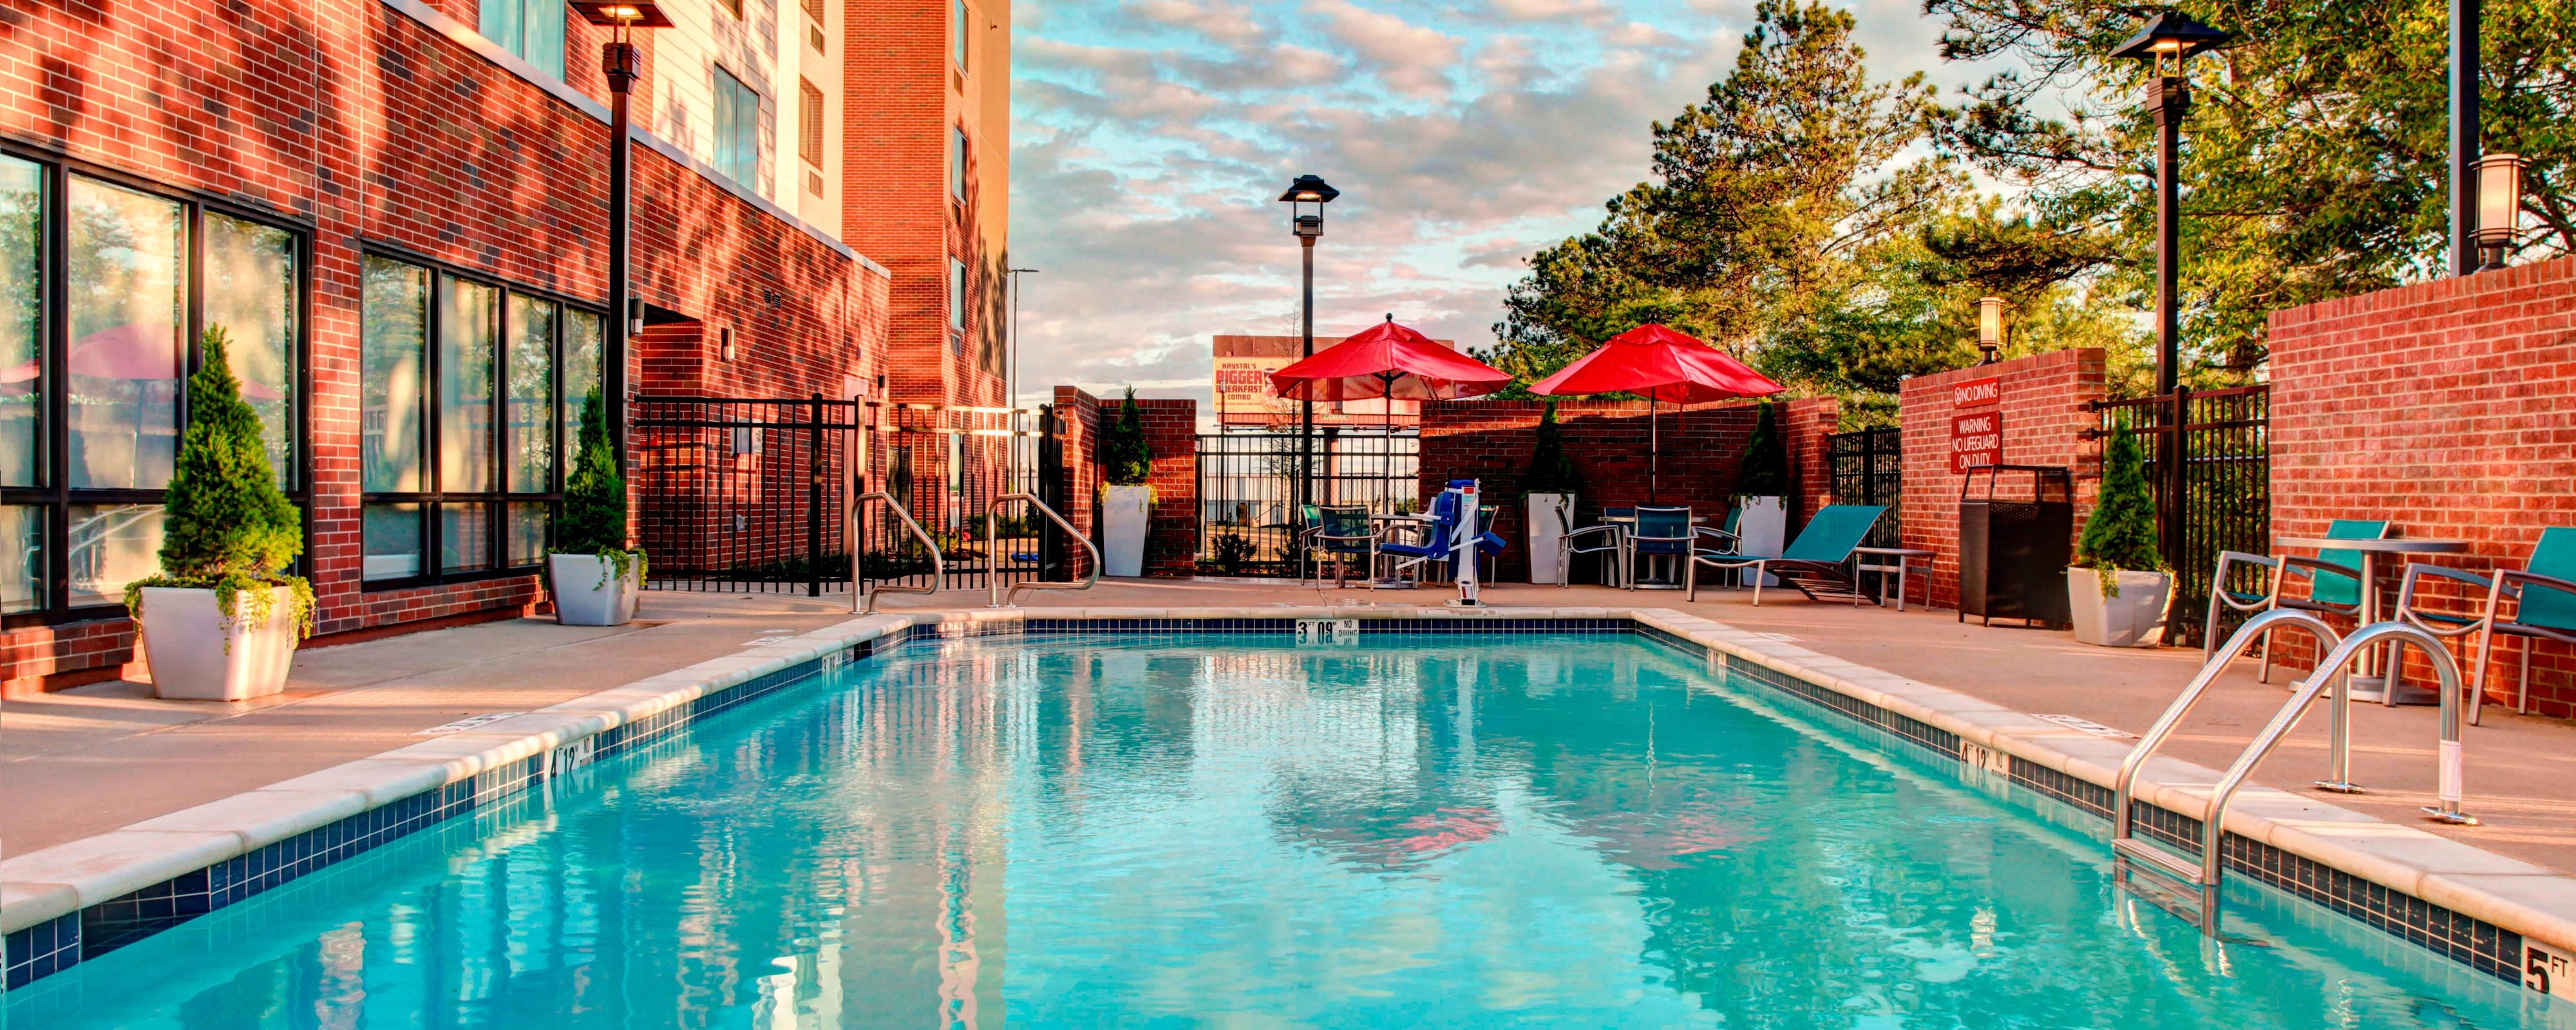 Long Term Hotel In Macon Towneplace Suites Macon Mercer University